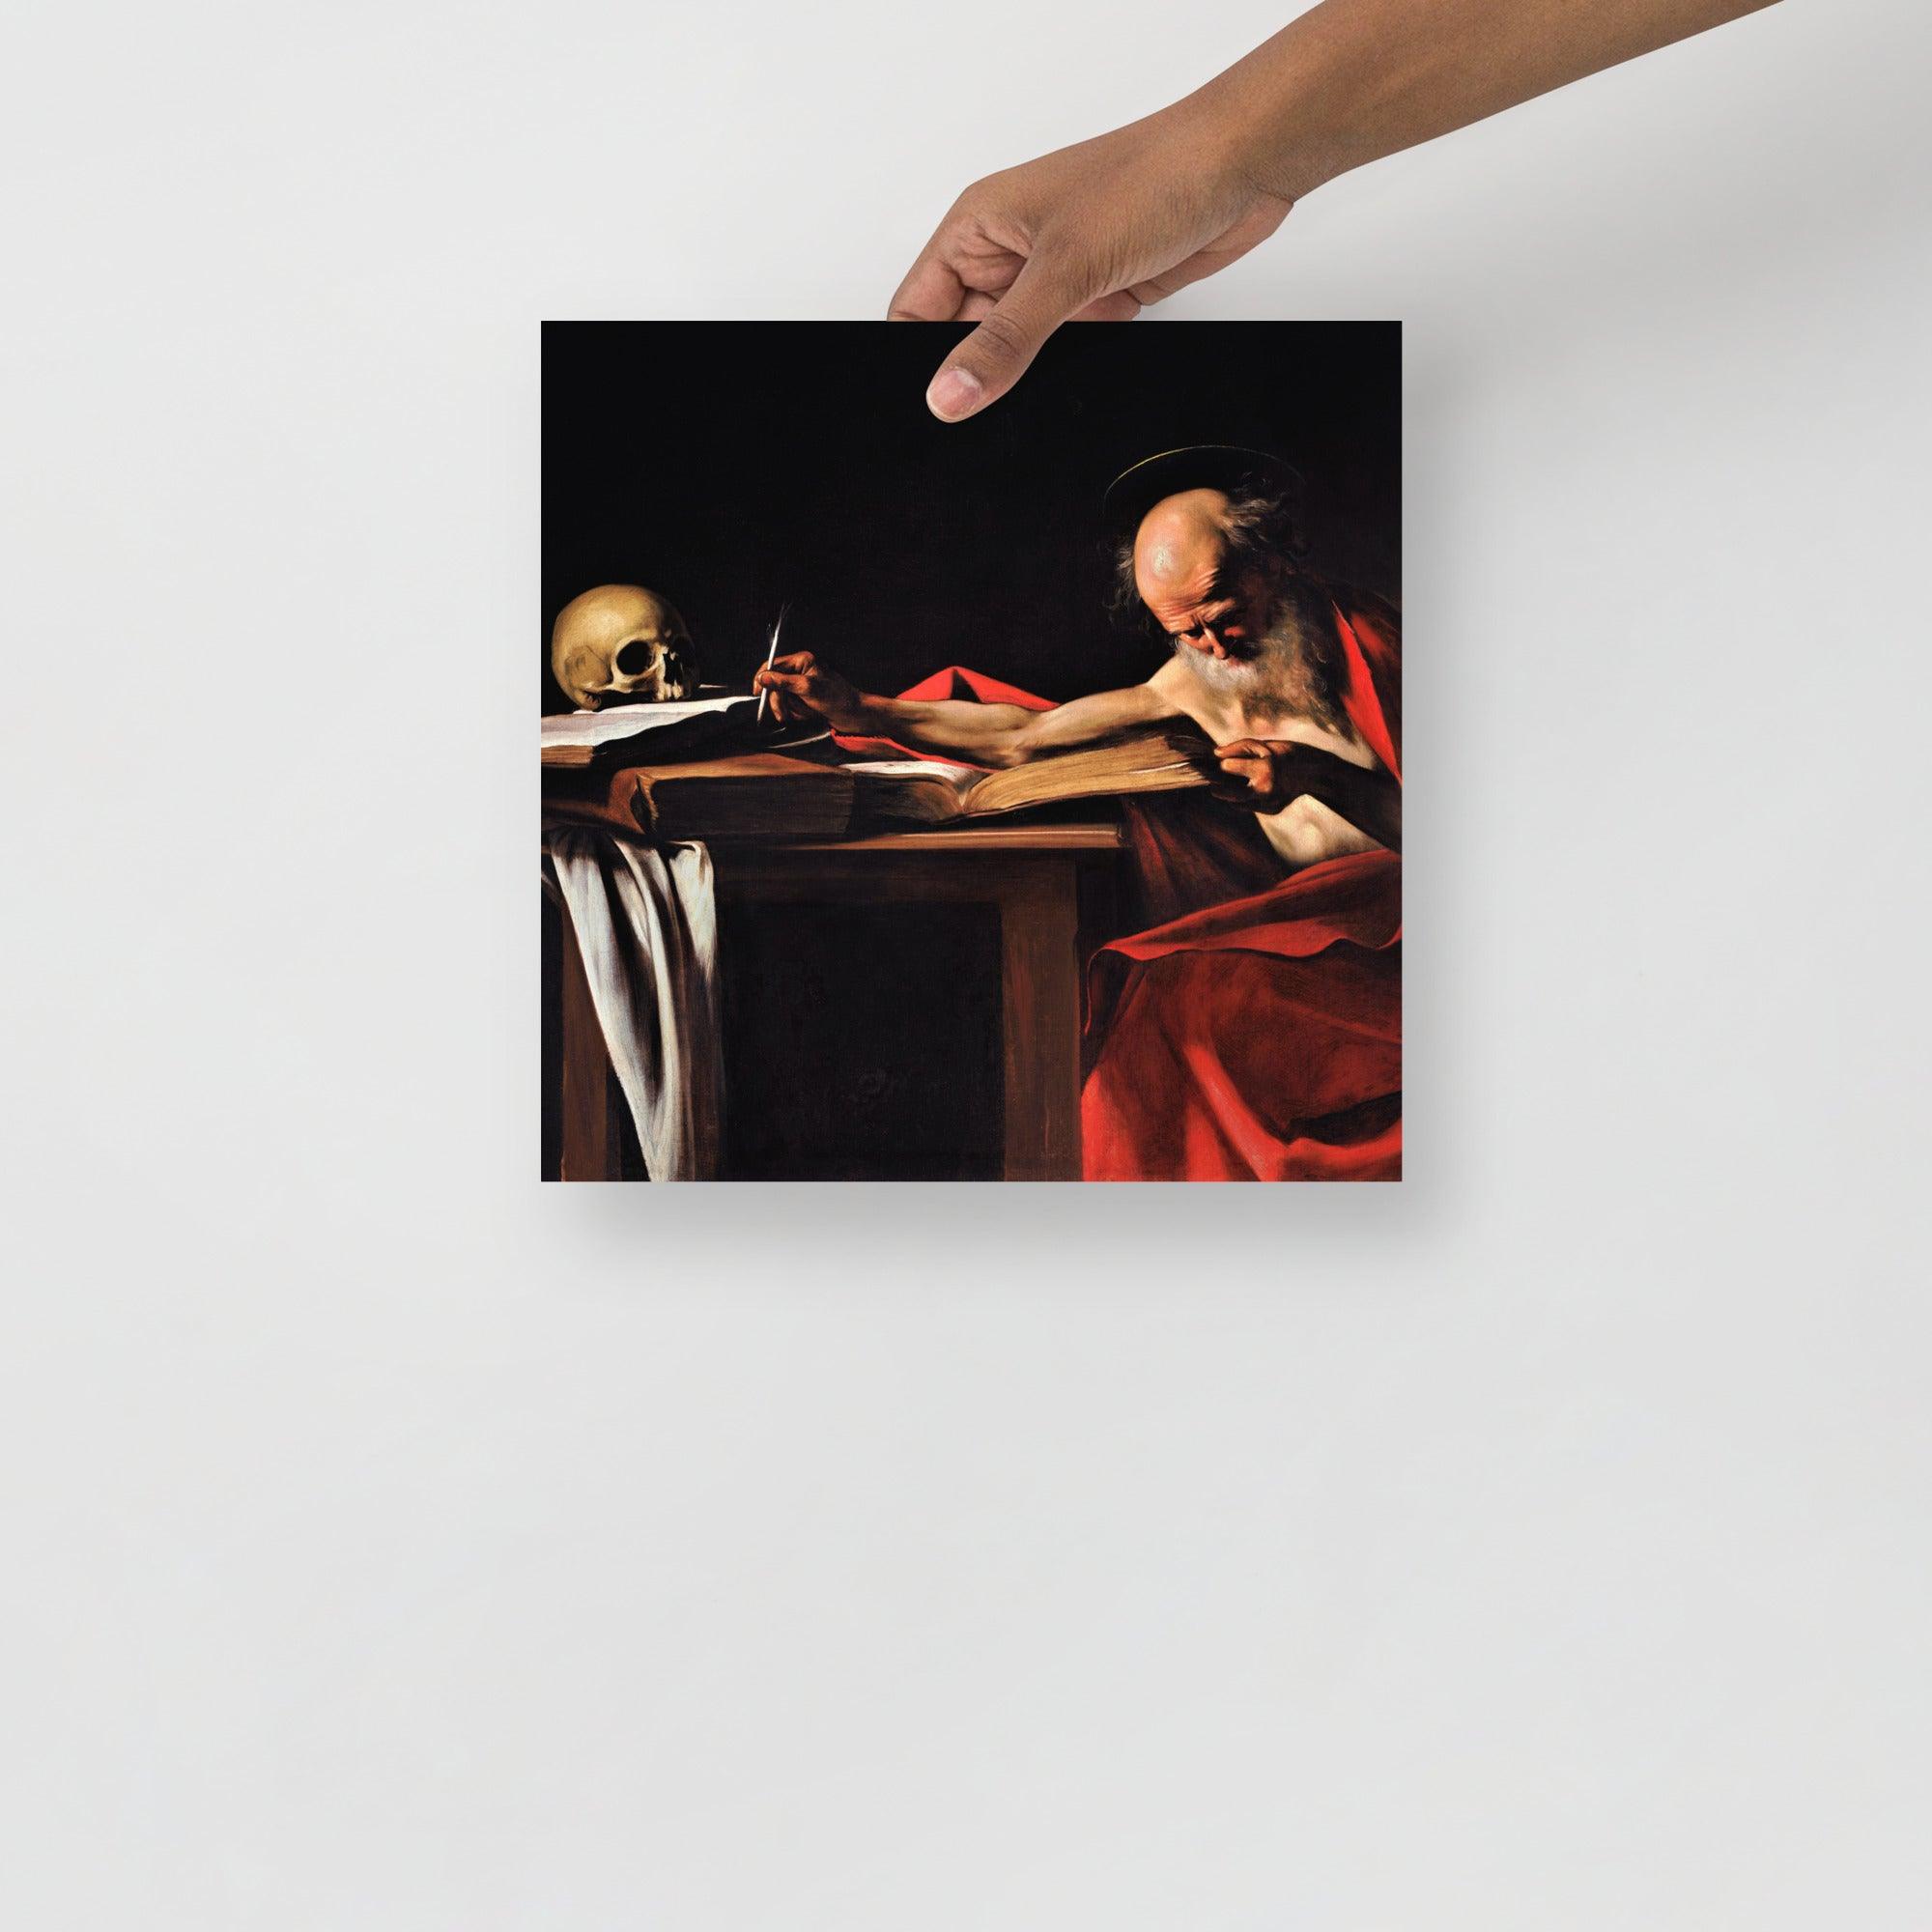 A Saint Jerome Writing by Caravaggio poster on a plain backdrop in size 12x12”.